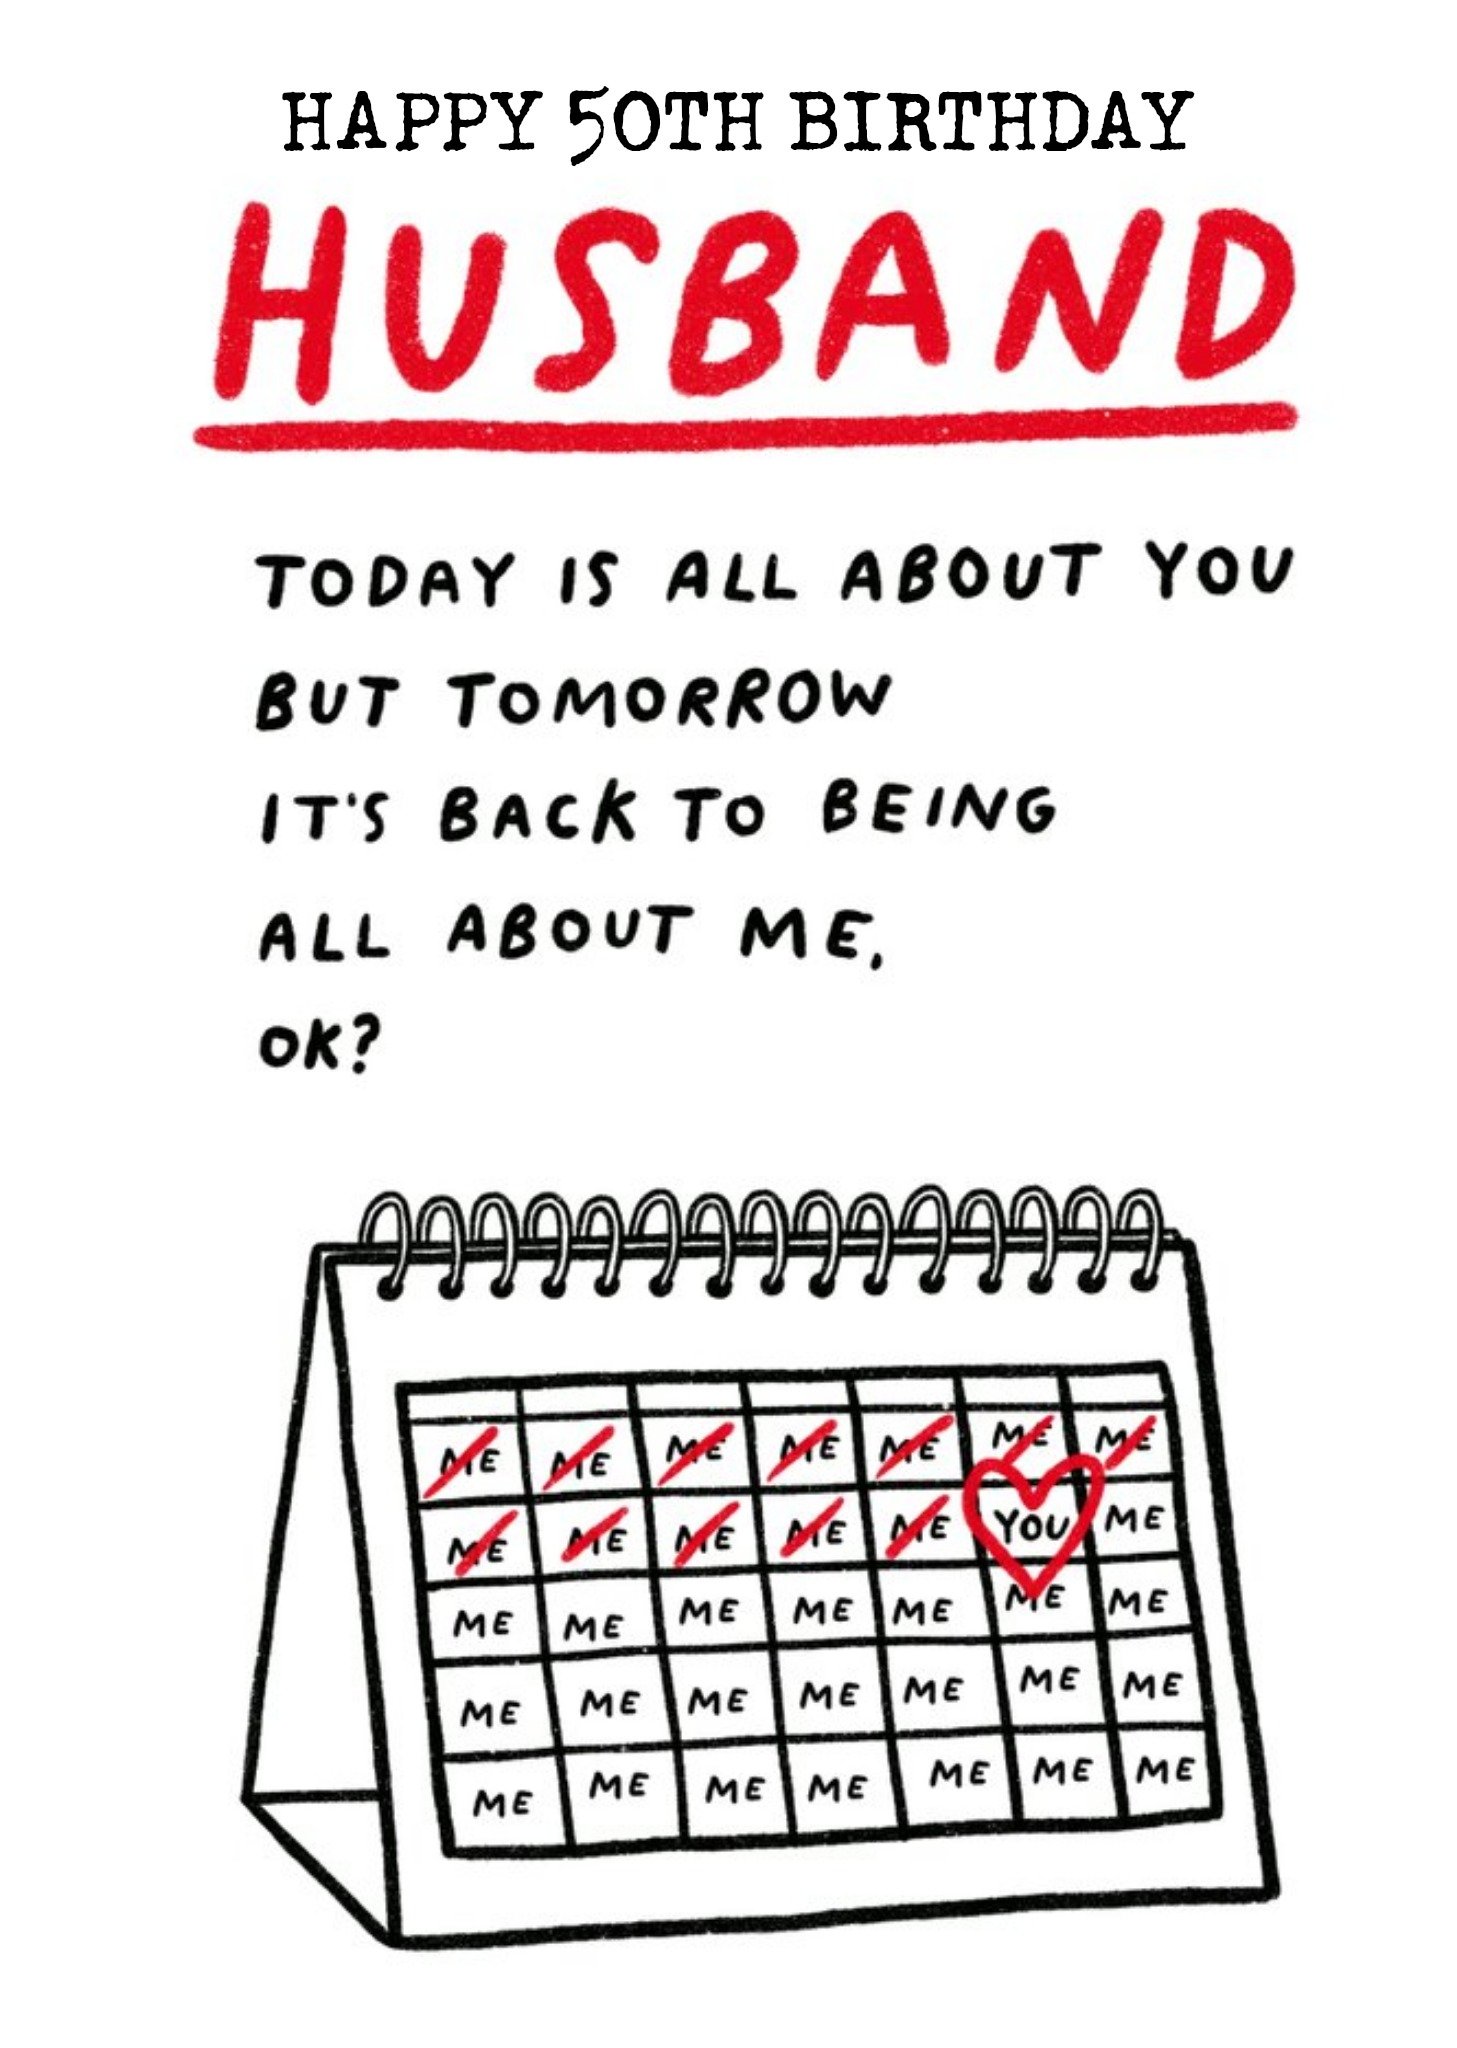 Moonpig Illustration Of A Monthly Planner Husband's Humorous 50th Birthday Card Ecard